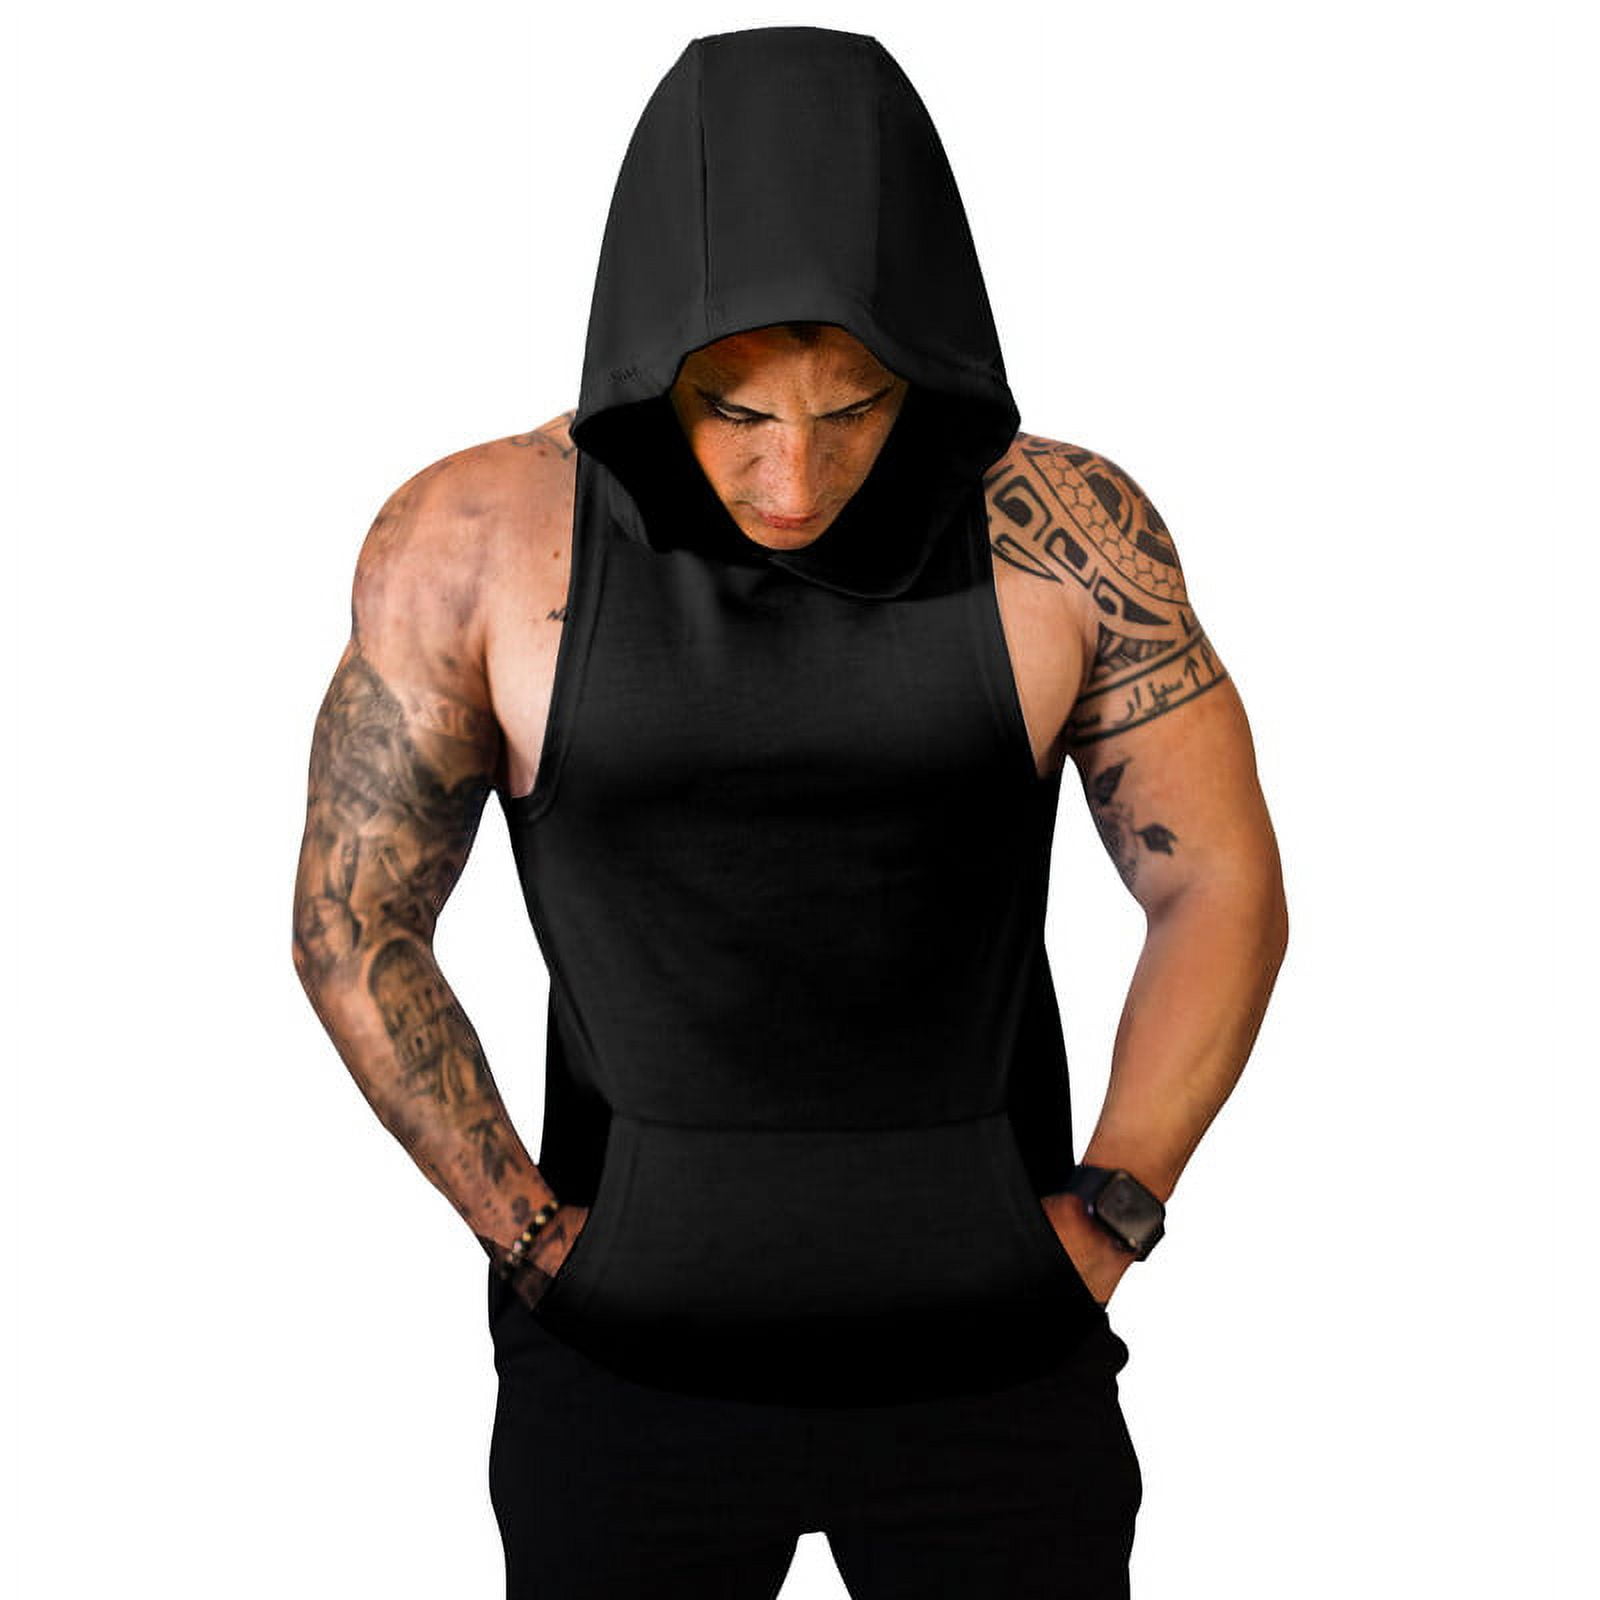 WORKOUT EMPIRE / DCORE Sudadera sin mangas hombre SLEEVELESS HOODIE black -  Private Sport Shop